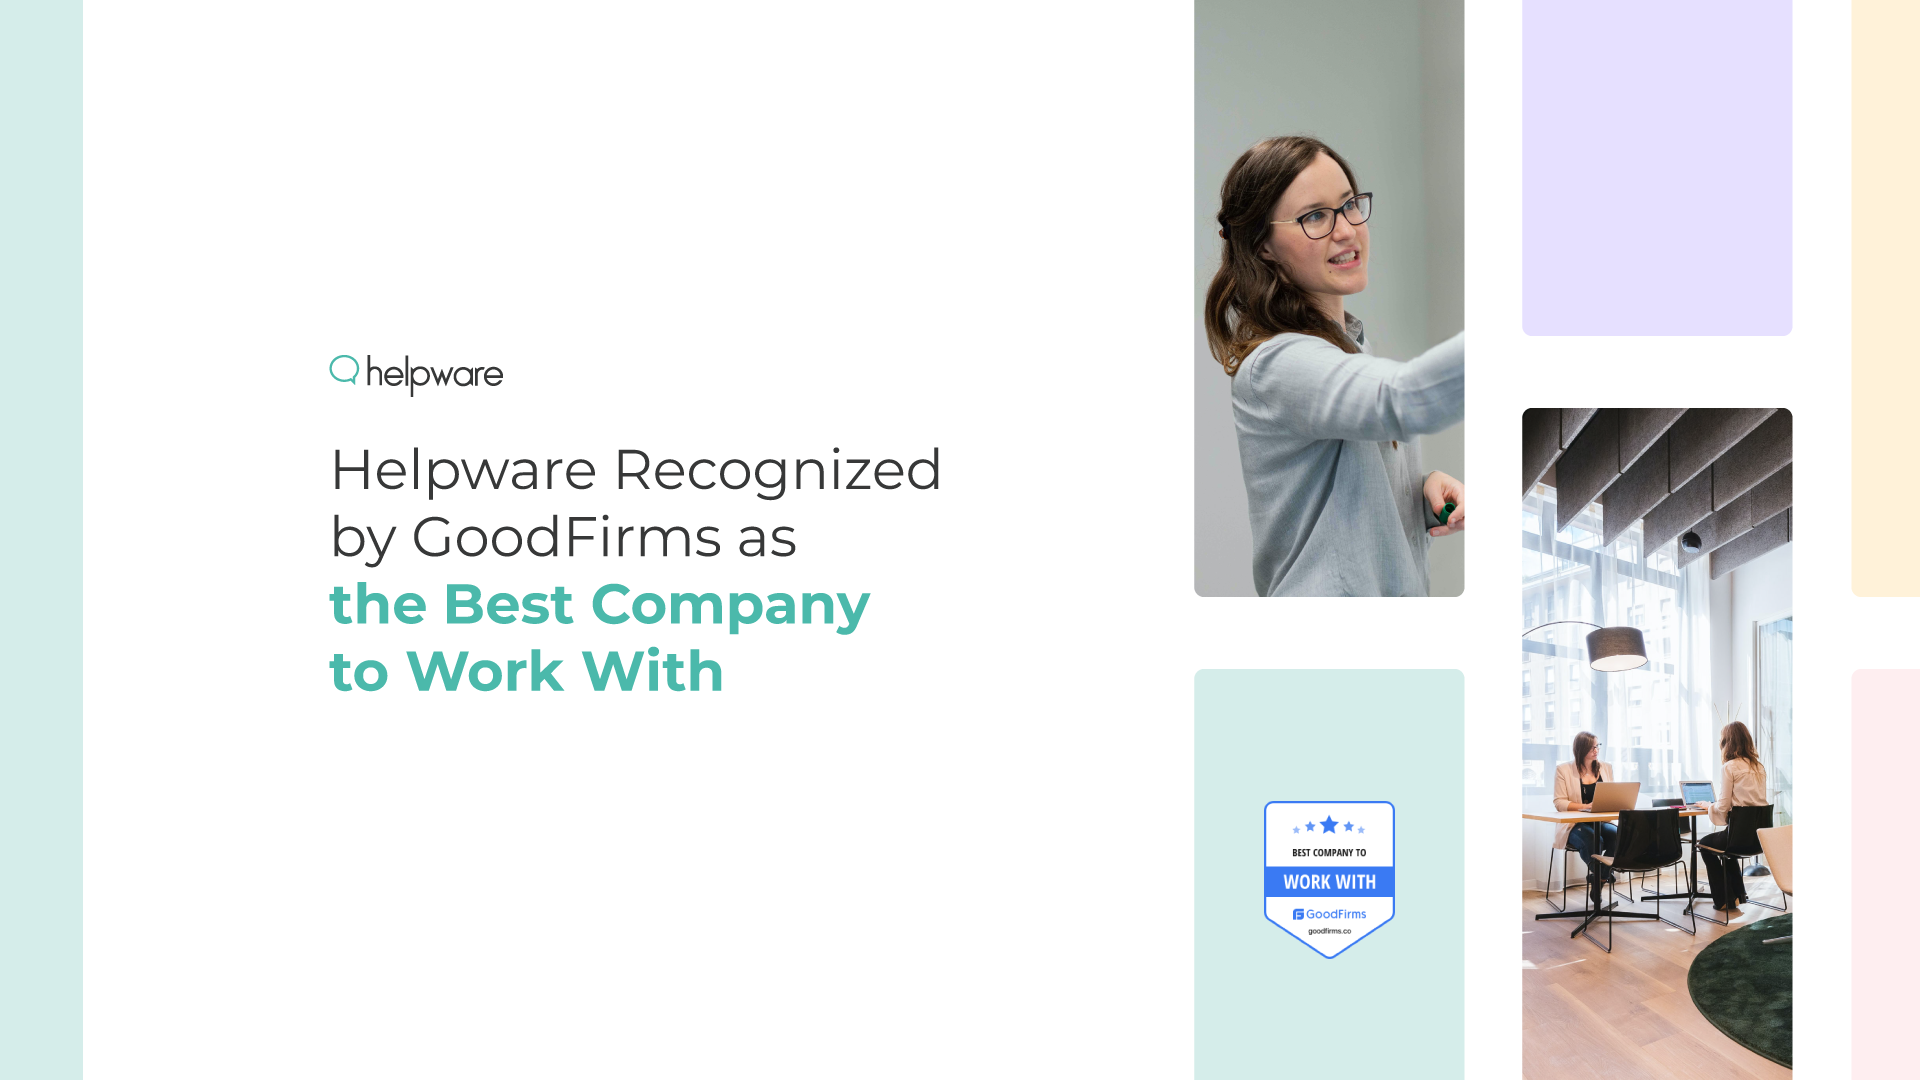 Helpware Recognized by GoodFirms as the Best Company to Work With